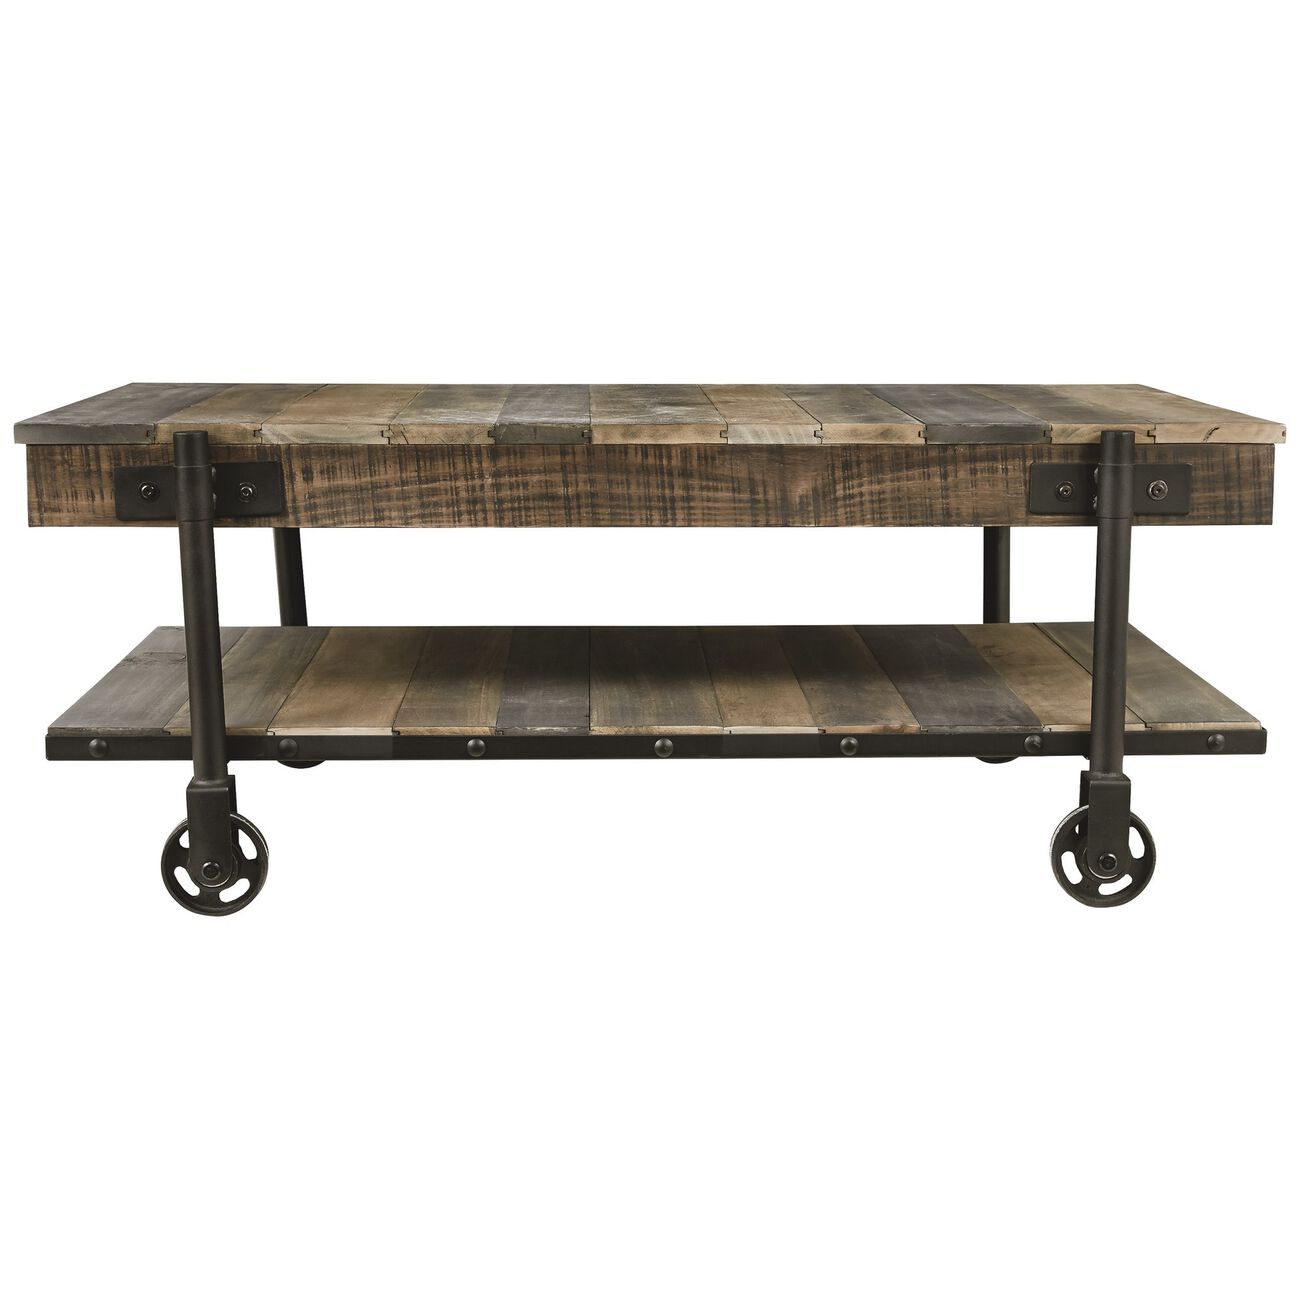 Plank Style Wooden Cocktail Table with Bottom Shelf and Caster Wheels,Brown